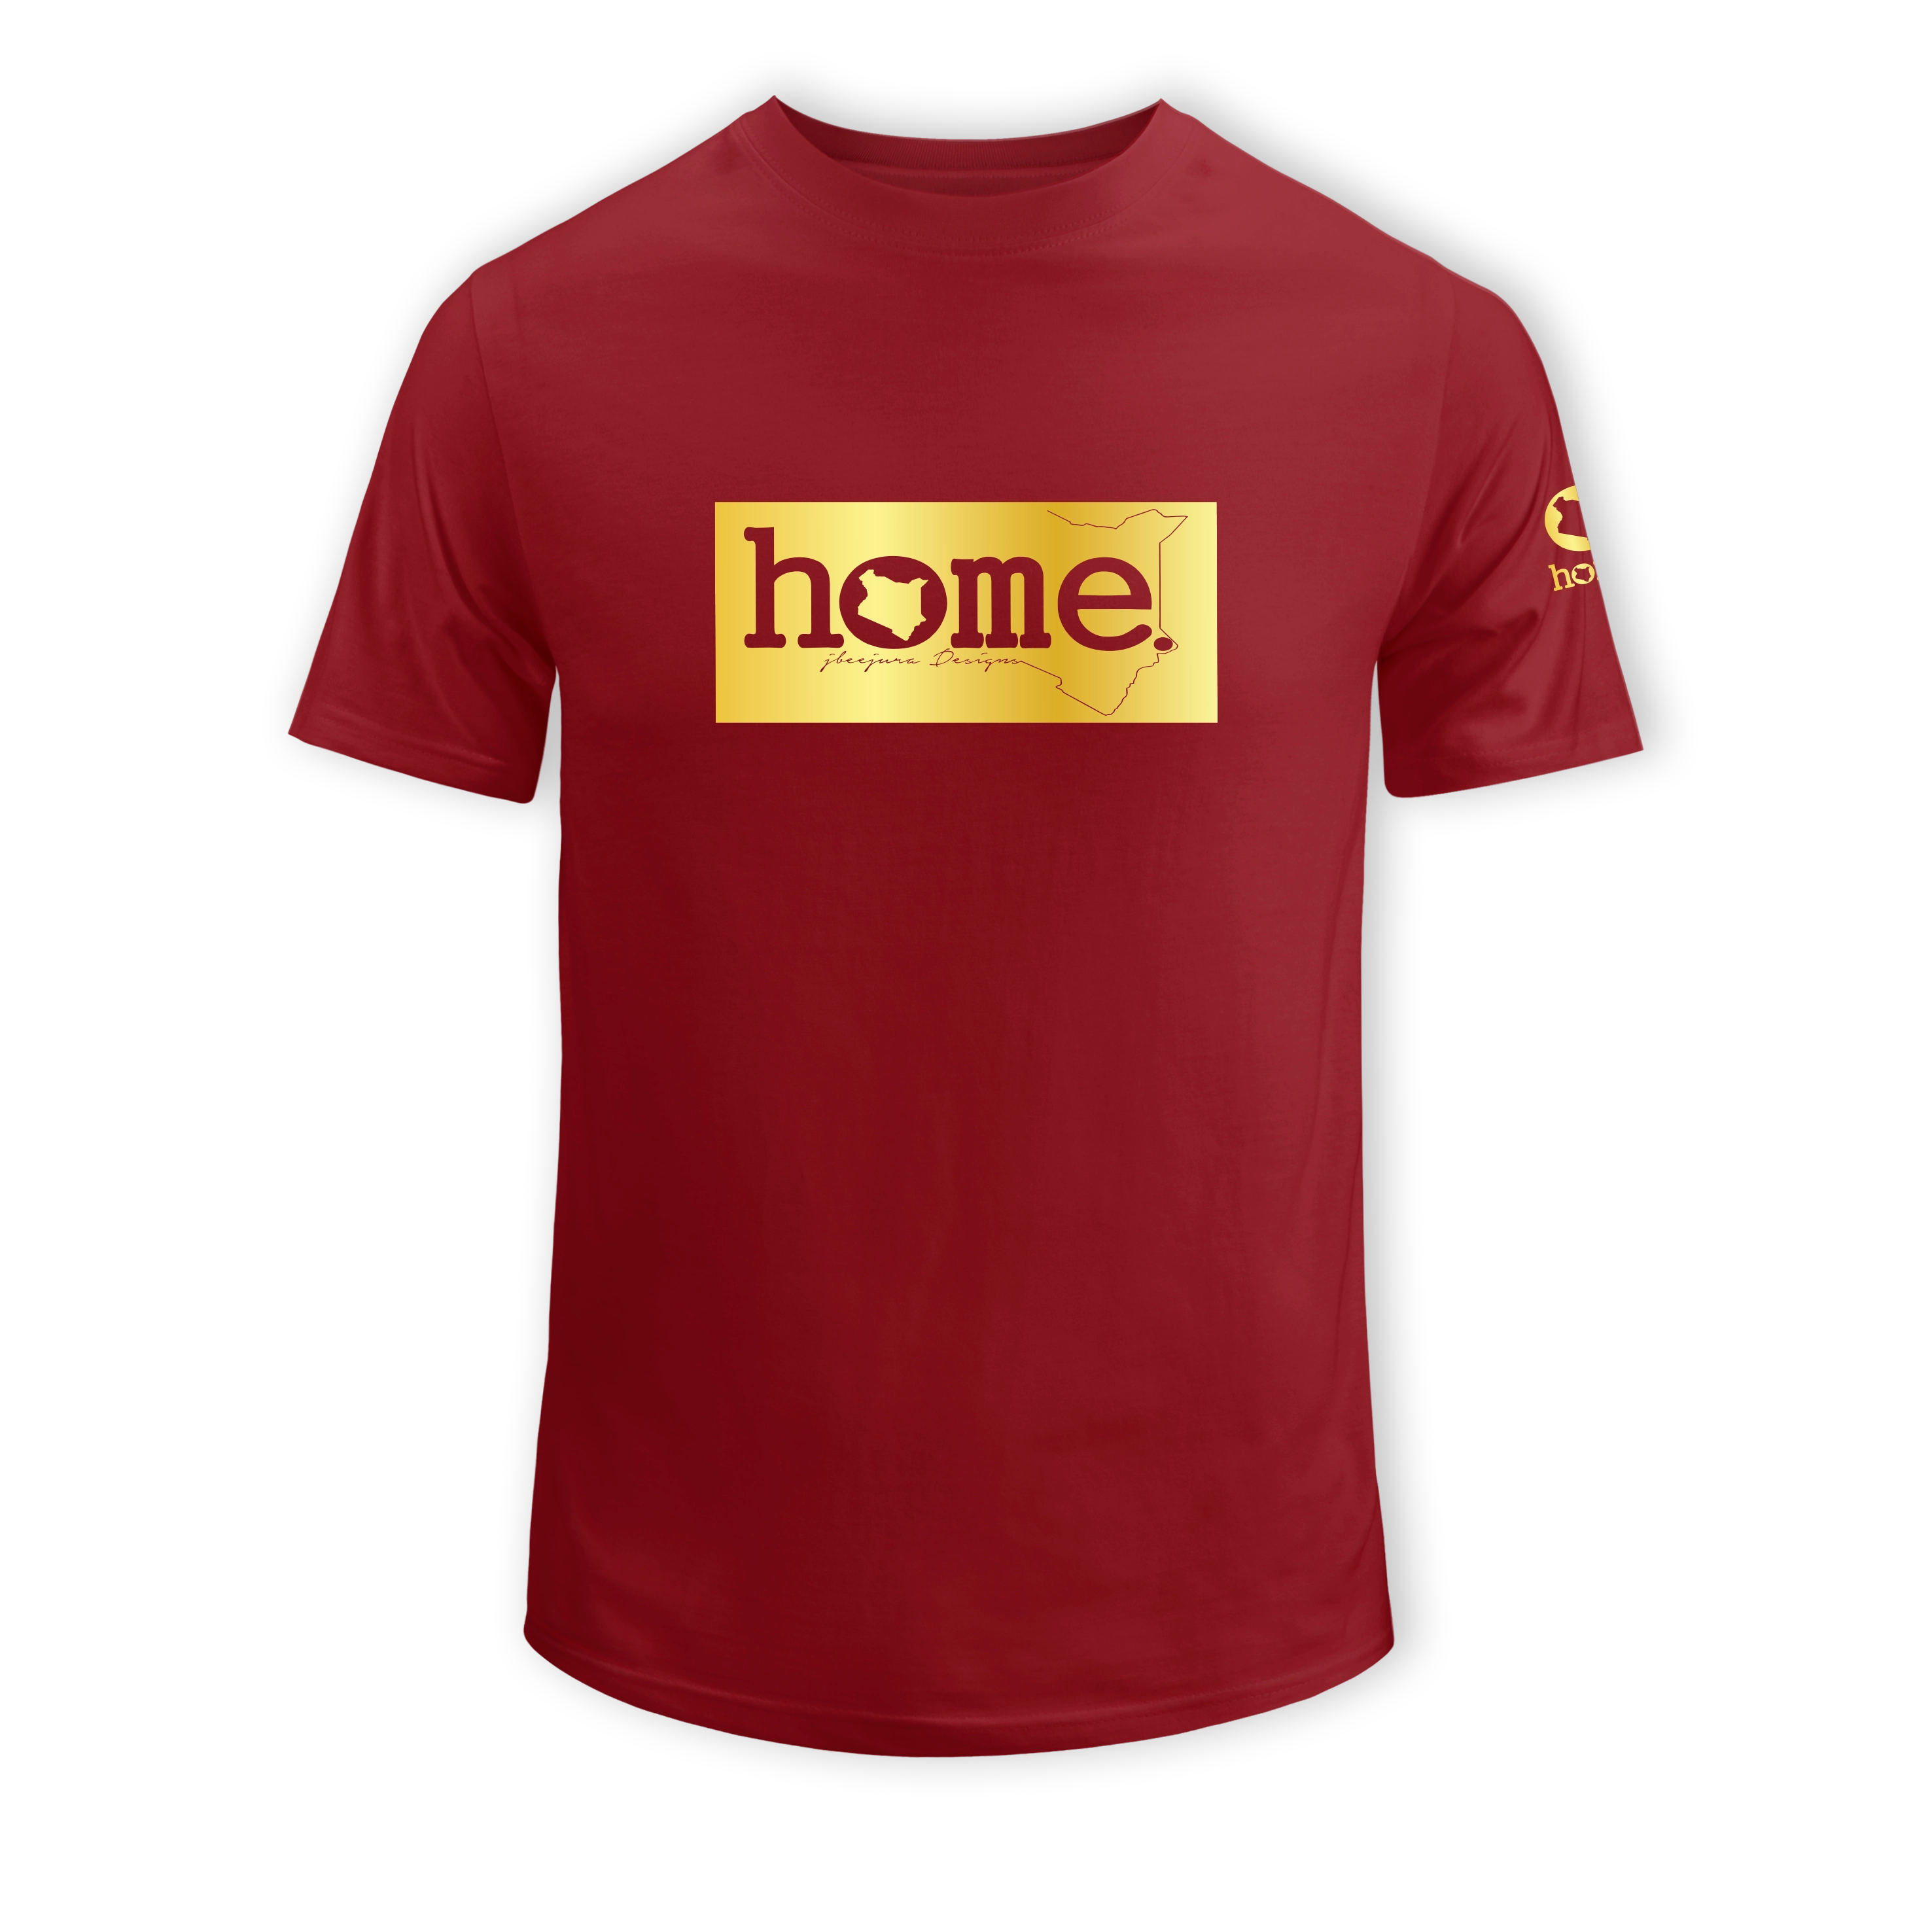 home_254 KIDS SHORT-SLEEVED MAROON RED T-SHIRT WITH A GOLD CLASSIC PRINT – COTTON PLUS FABRIC